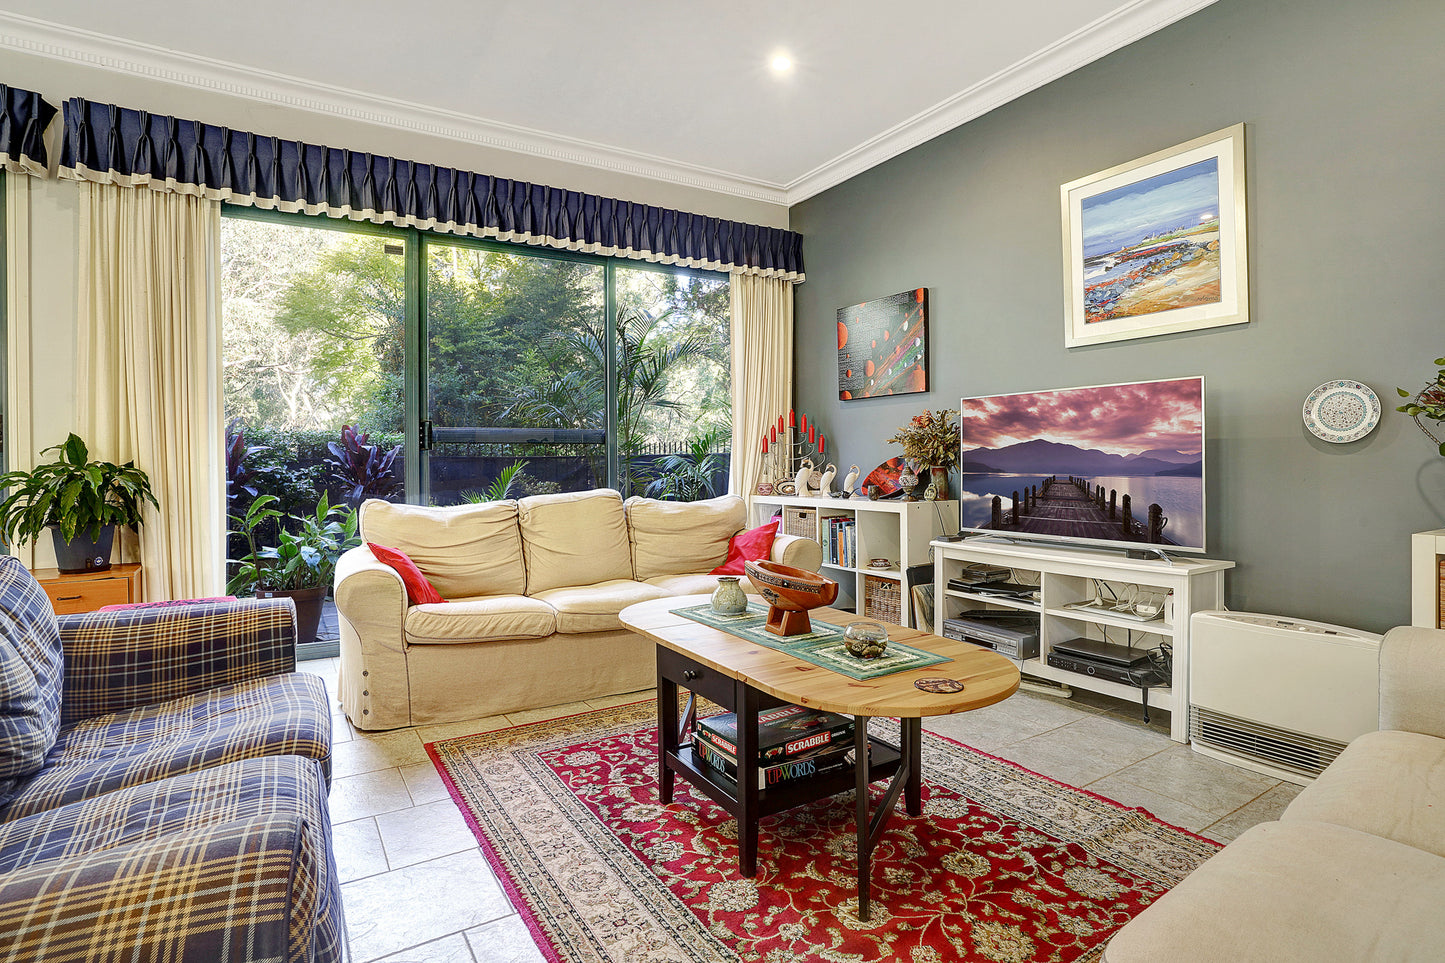 11/36 North Rocks Road, North Rocks, NSW 2151 - SOLD YOU ARE SURE THE LOVE IT WHEN YOU SELL WITH US